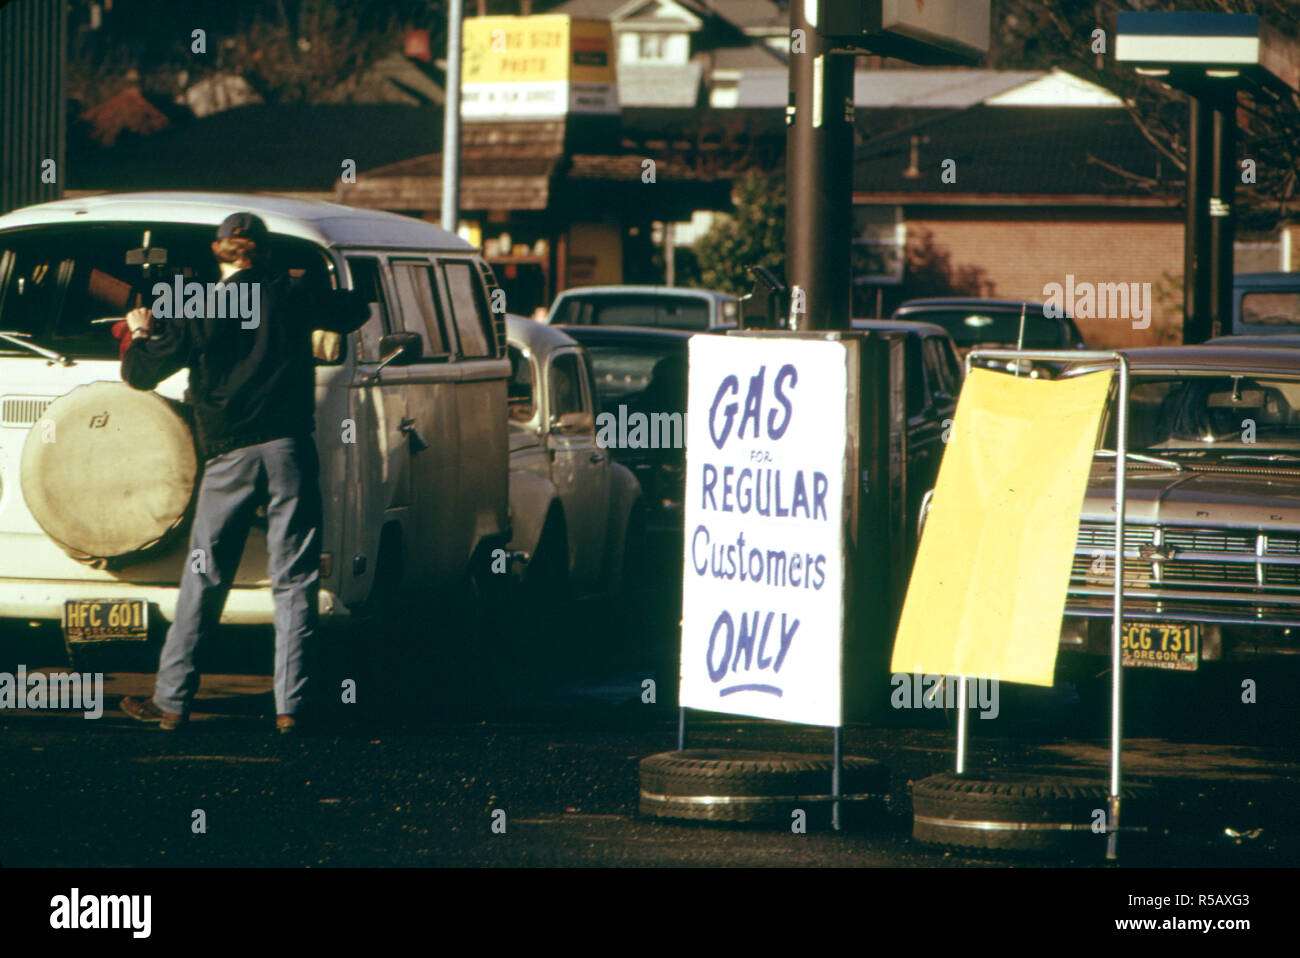 1974 Portland - The State of Oregon Had a Flag System in Addition to Its Odd-Even System of Allocating Gasoline 01/1974 Stock Photo